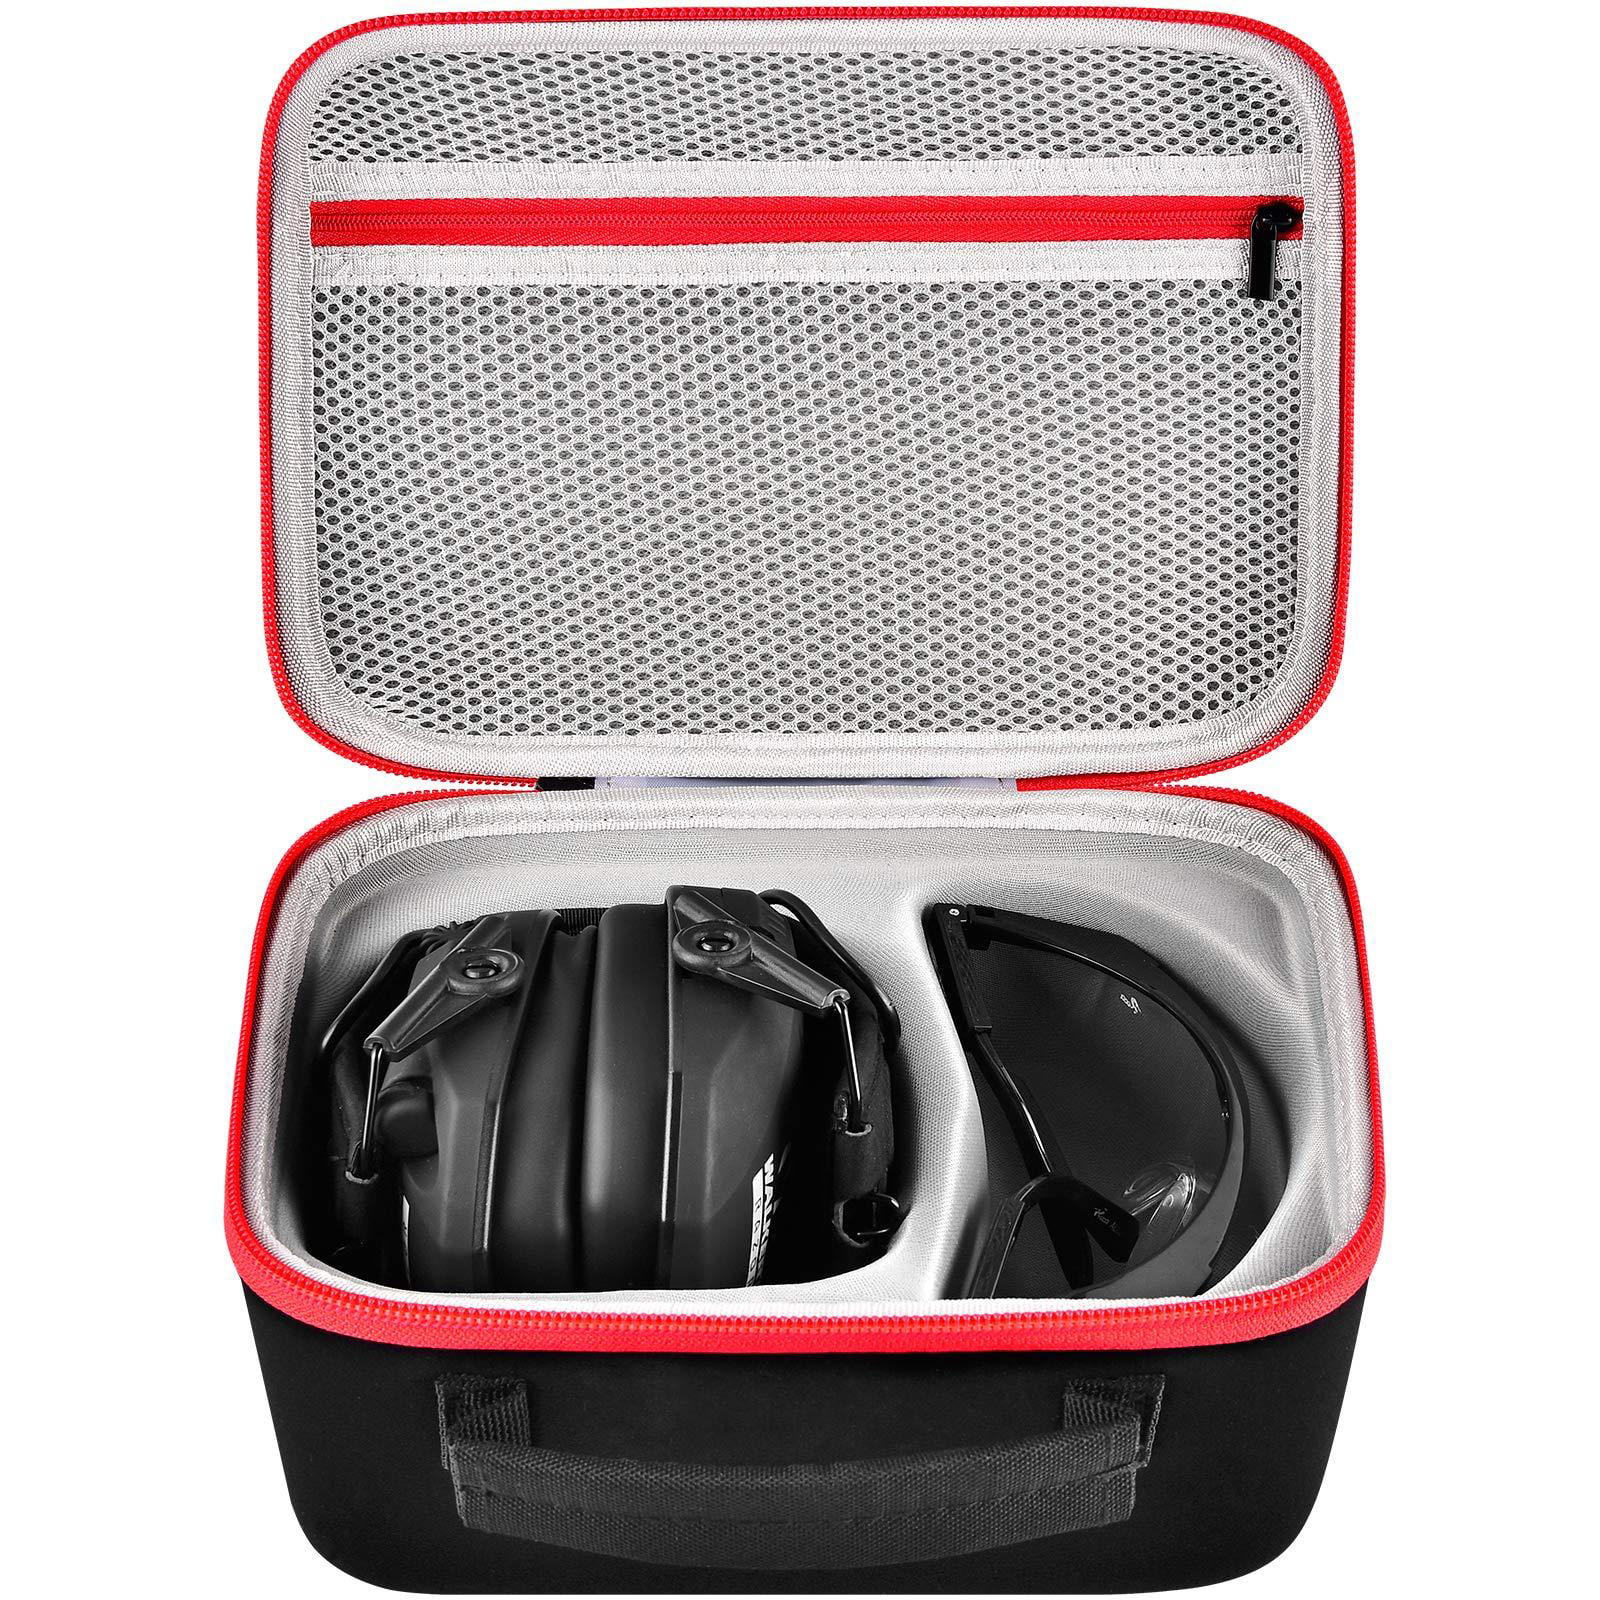 Durable Impact Resistant Hard Case for Howard Leight Electronic Shooting Earmuff 